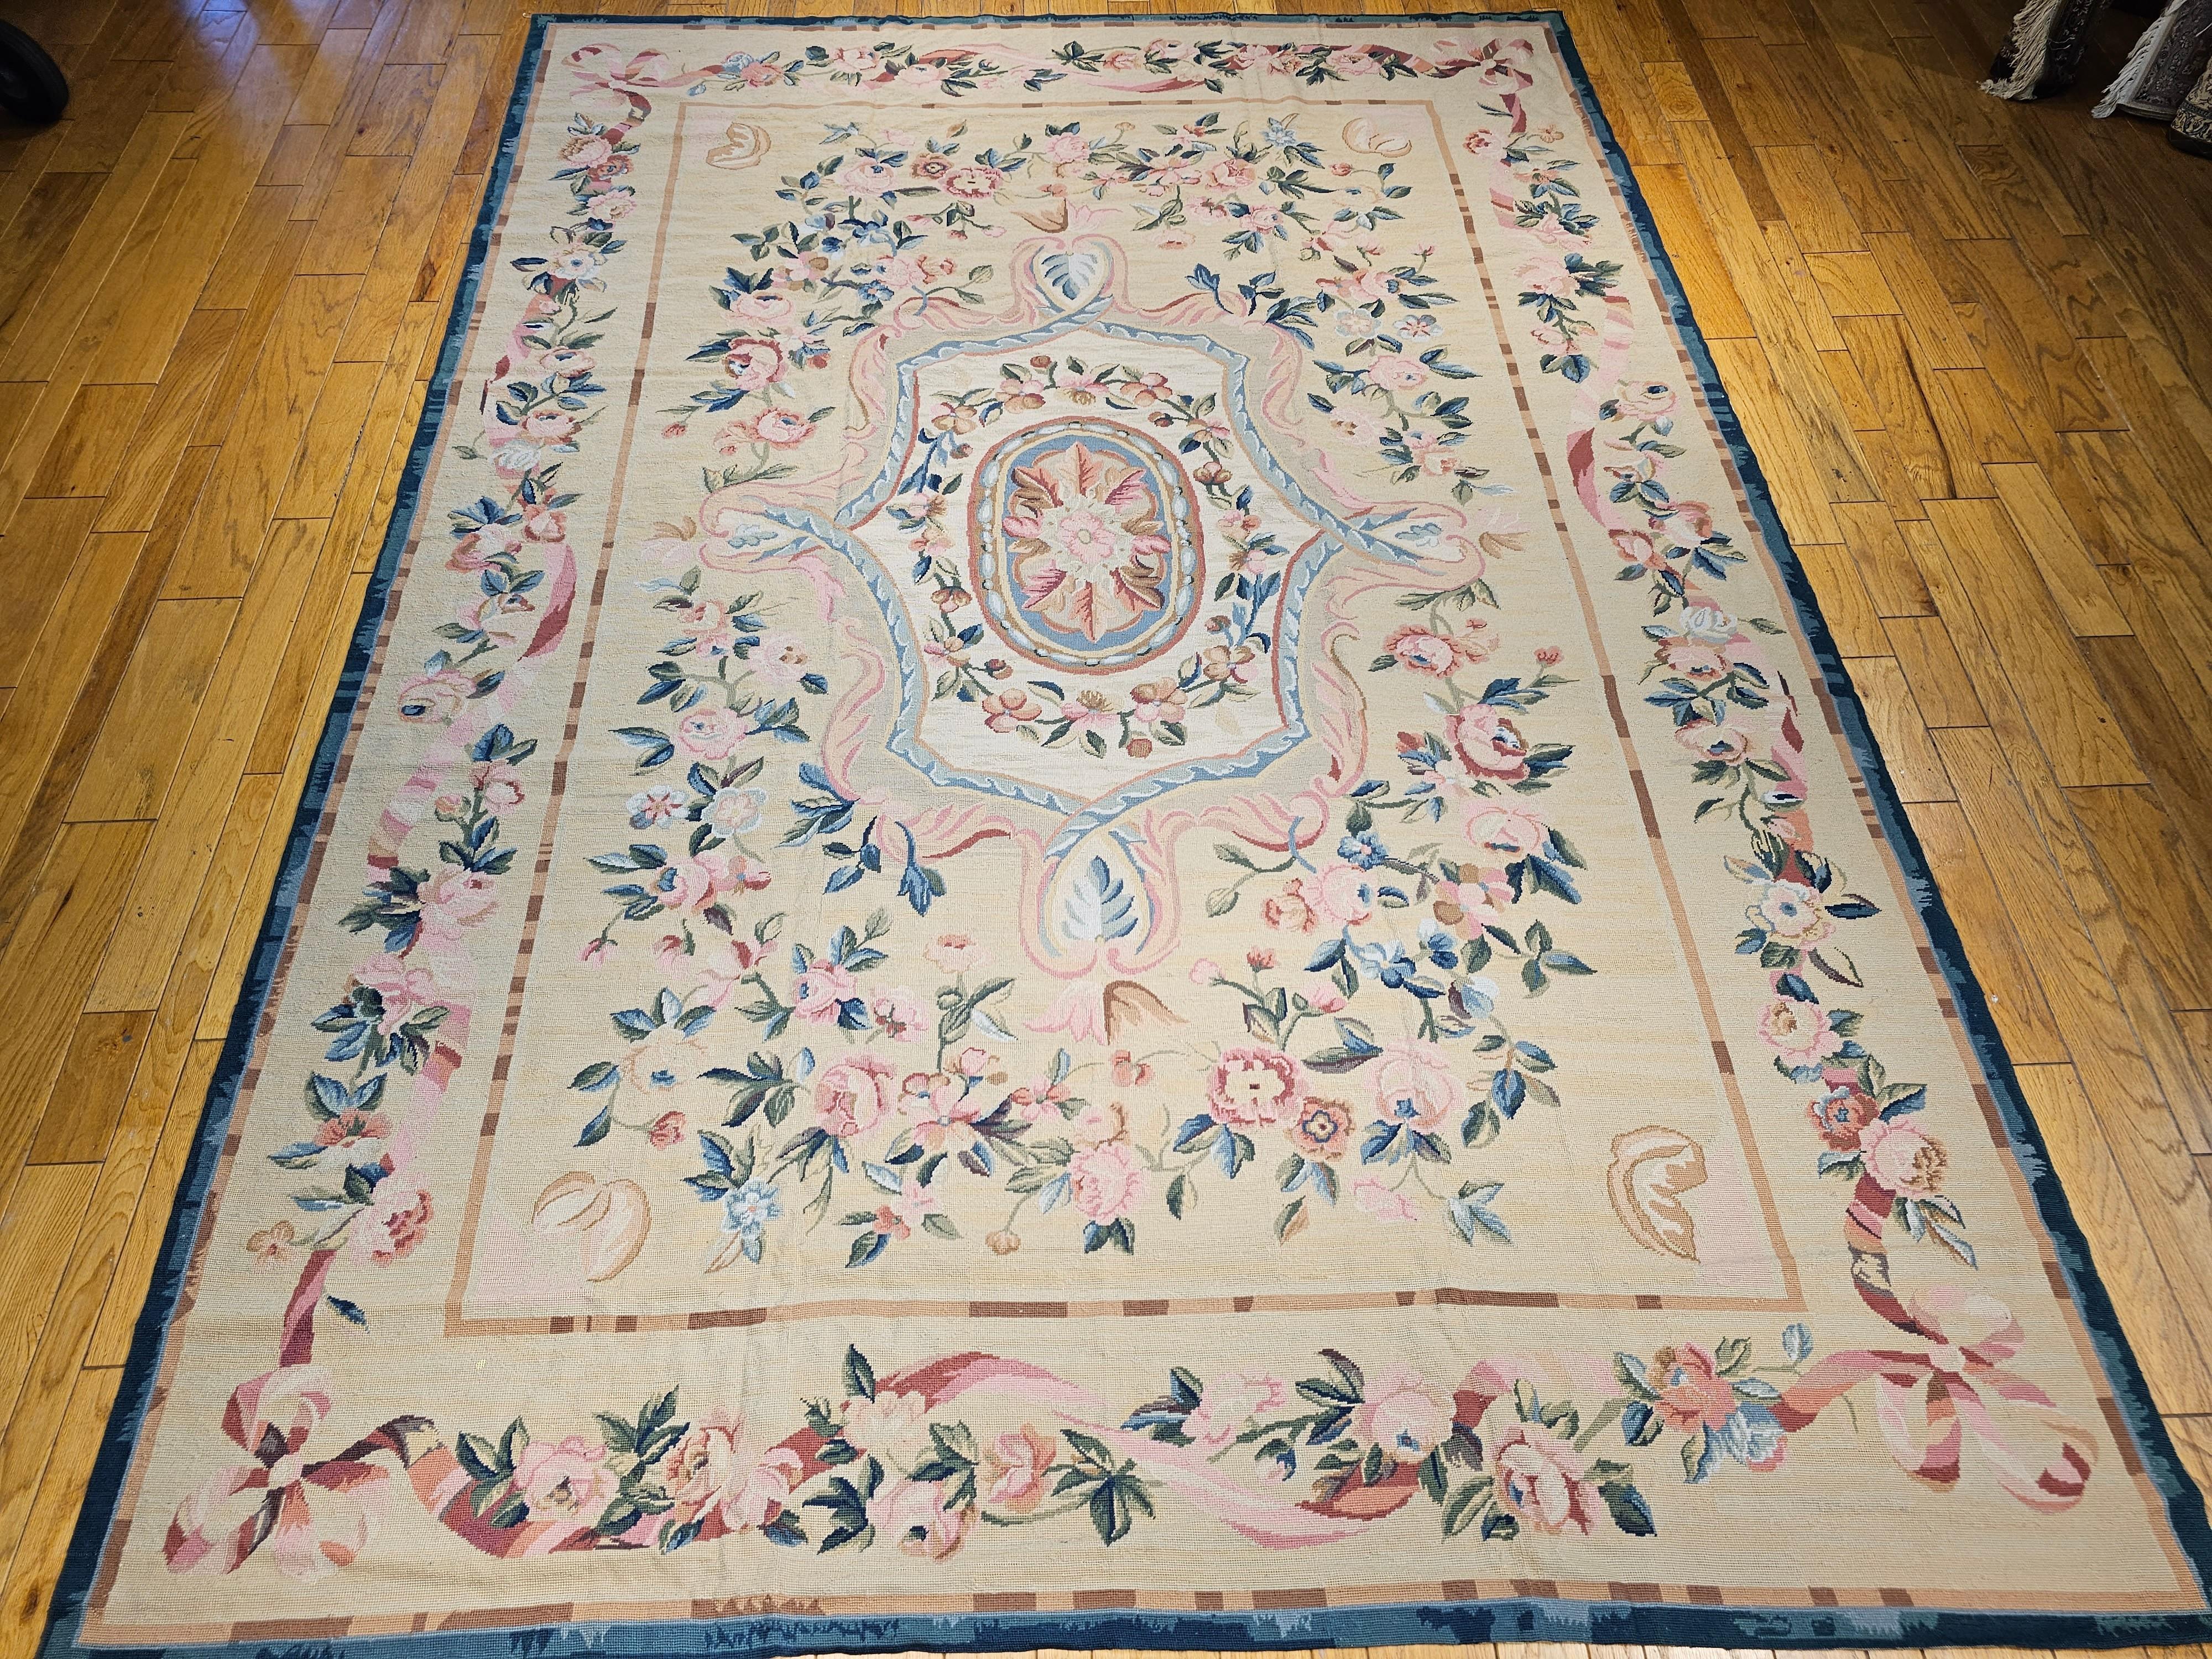 A handwoven antique French Aubusson needlework carpet from the late 1800s.  This needlepoint Aubusson rug has a floral design of large flowers and leaves in several shades of pink, red, green, brown, and gray colors set in a light yellow or beige